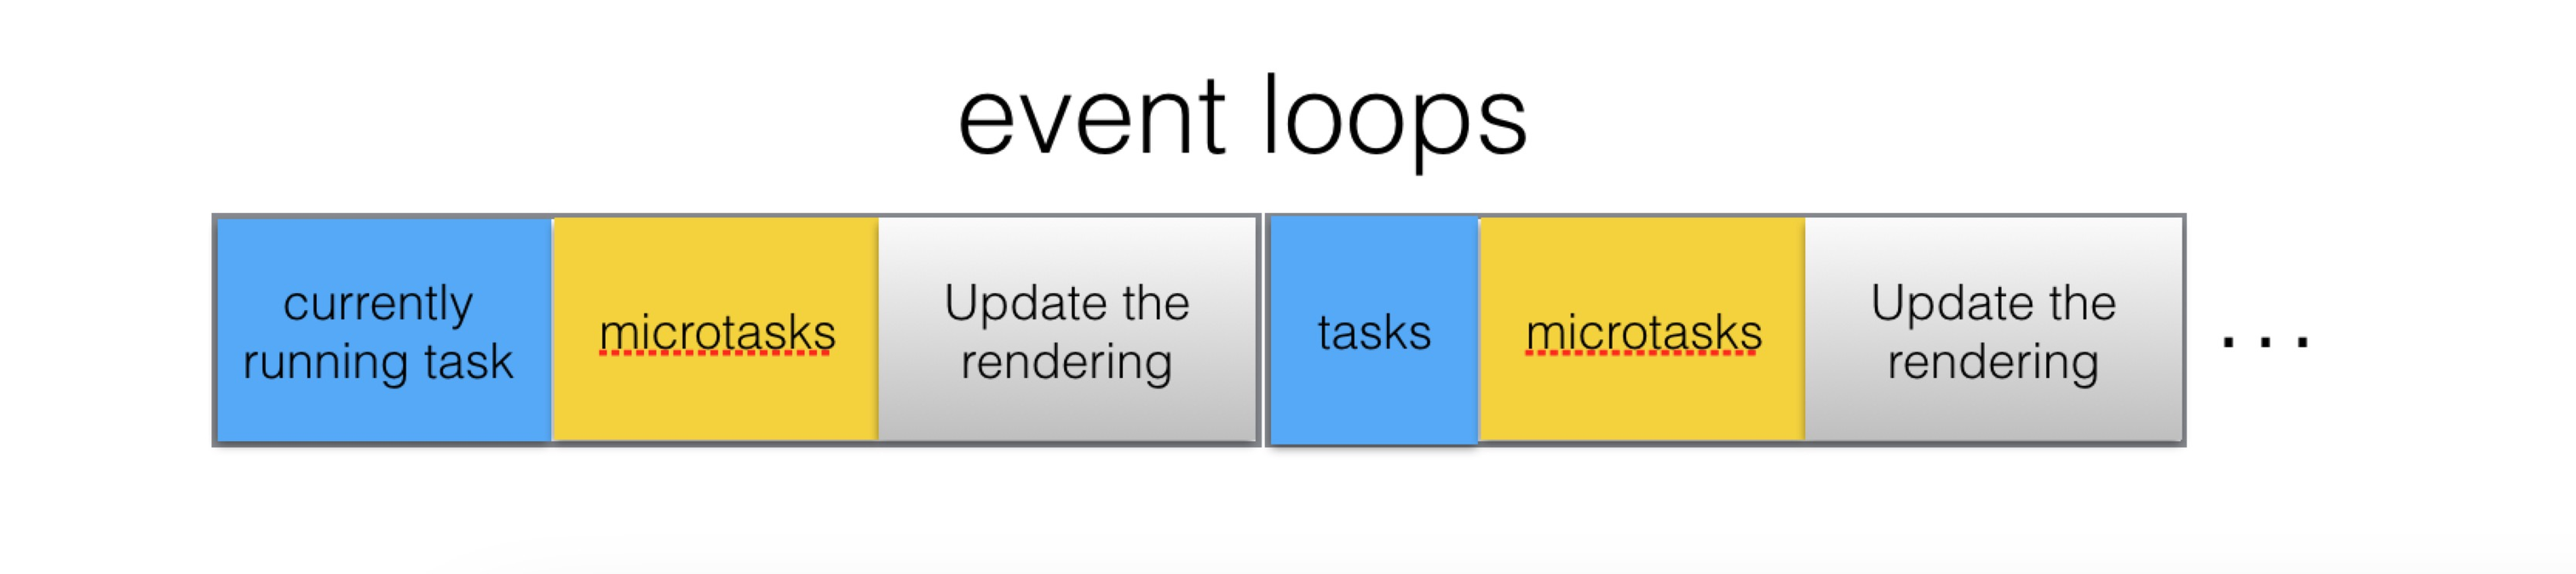 event loops